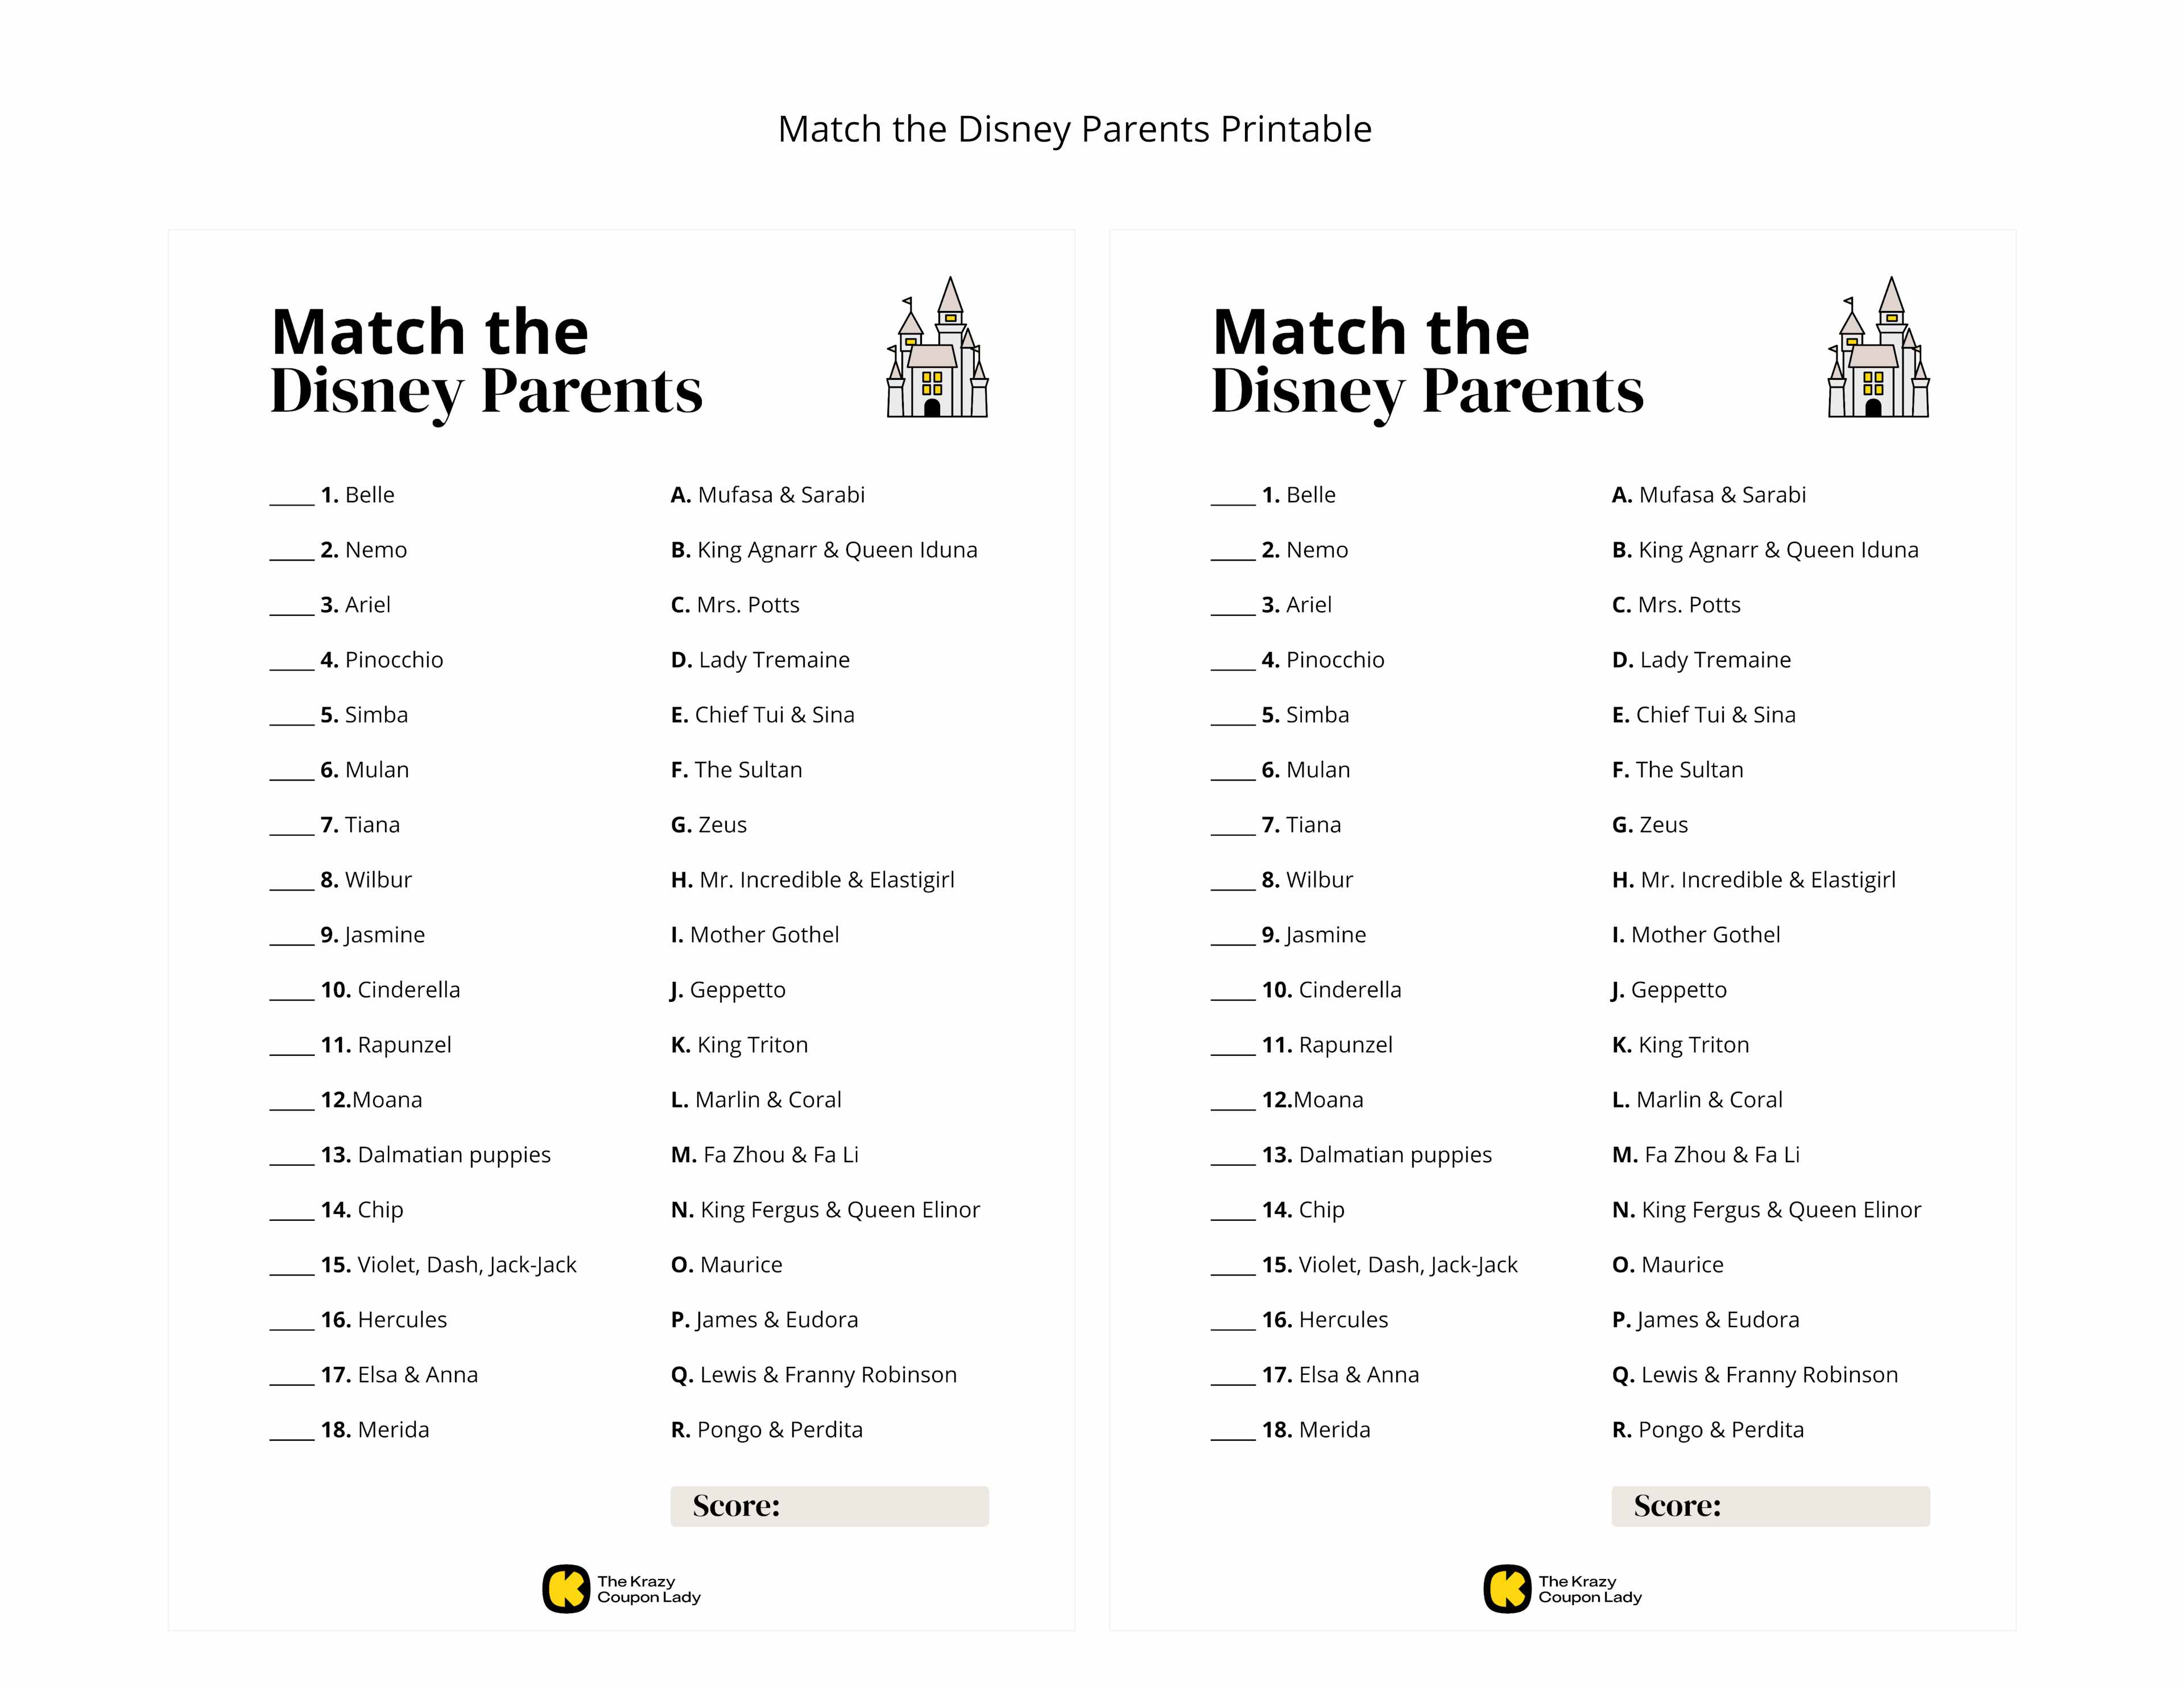 Match the Disney Parents baby shower game